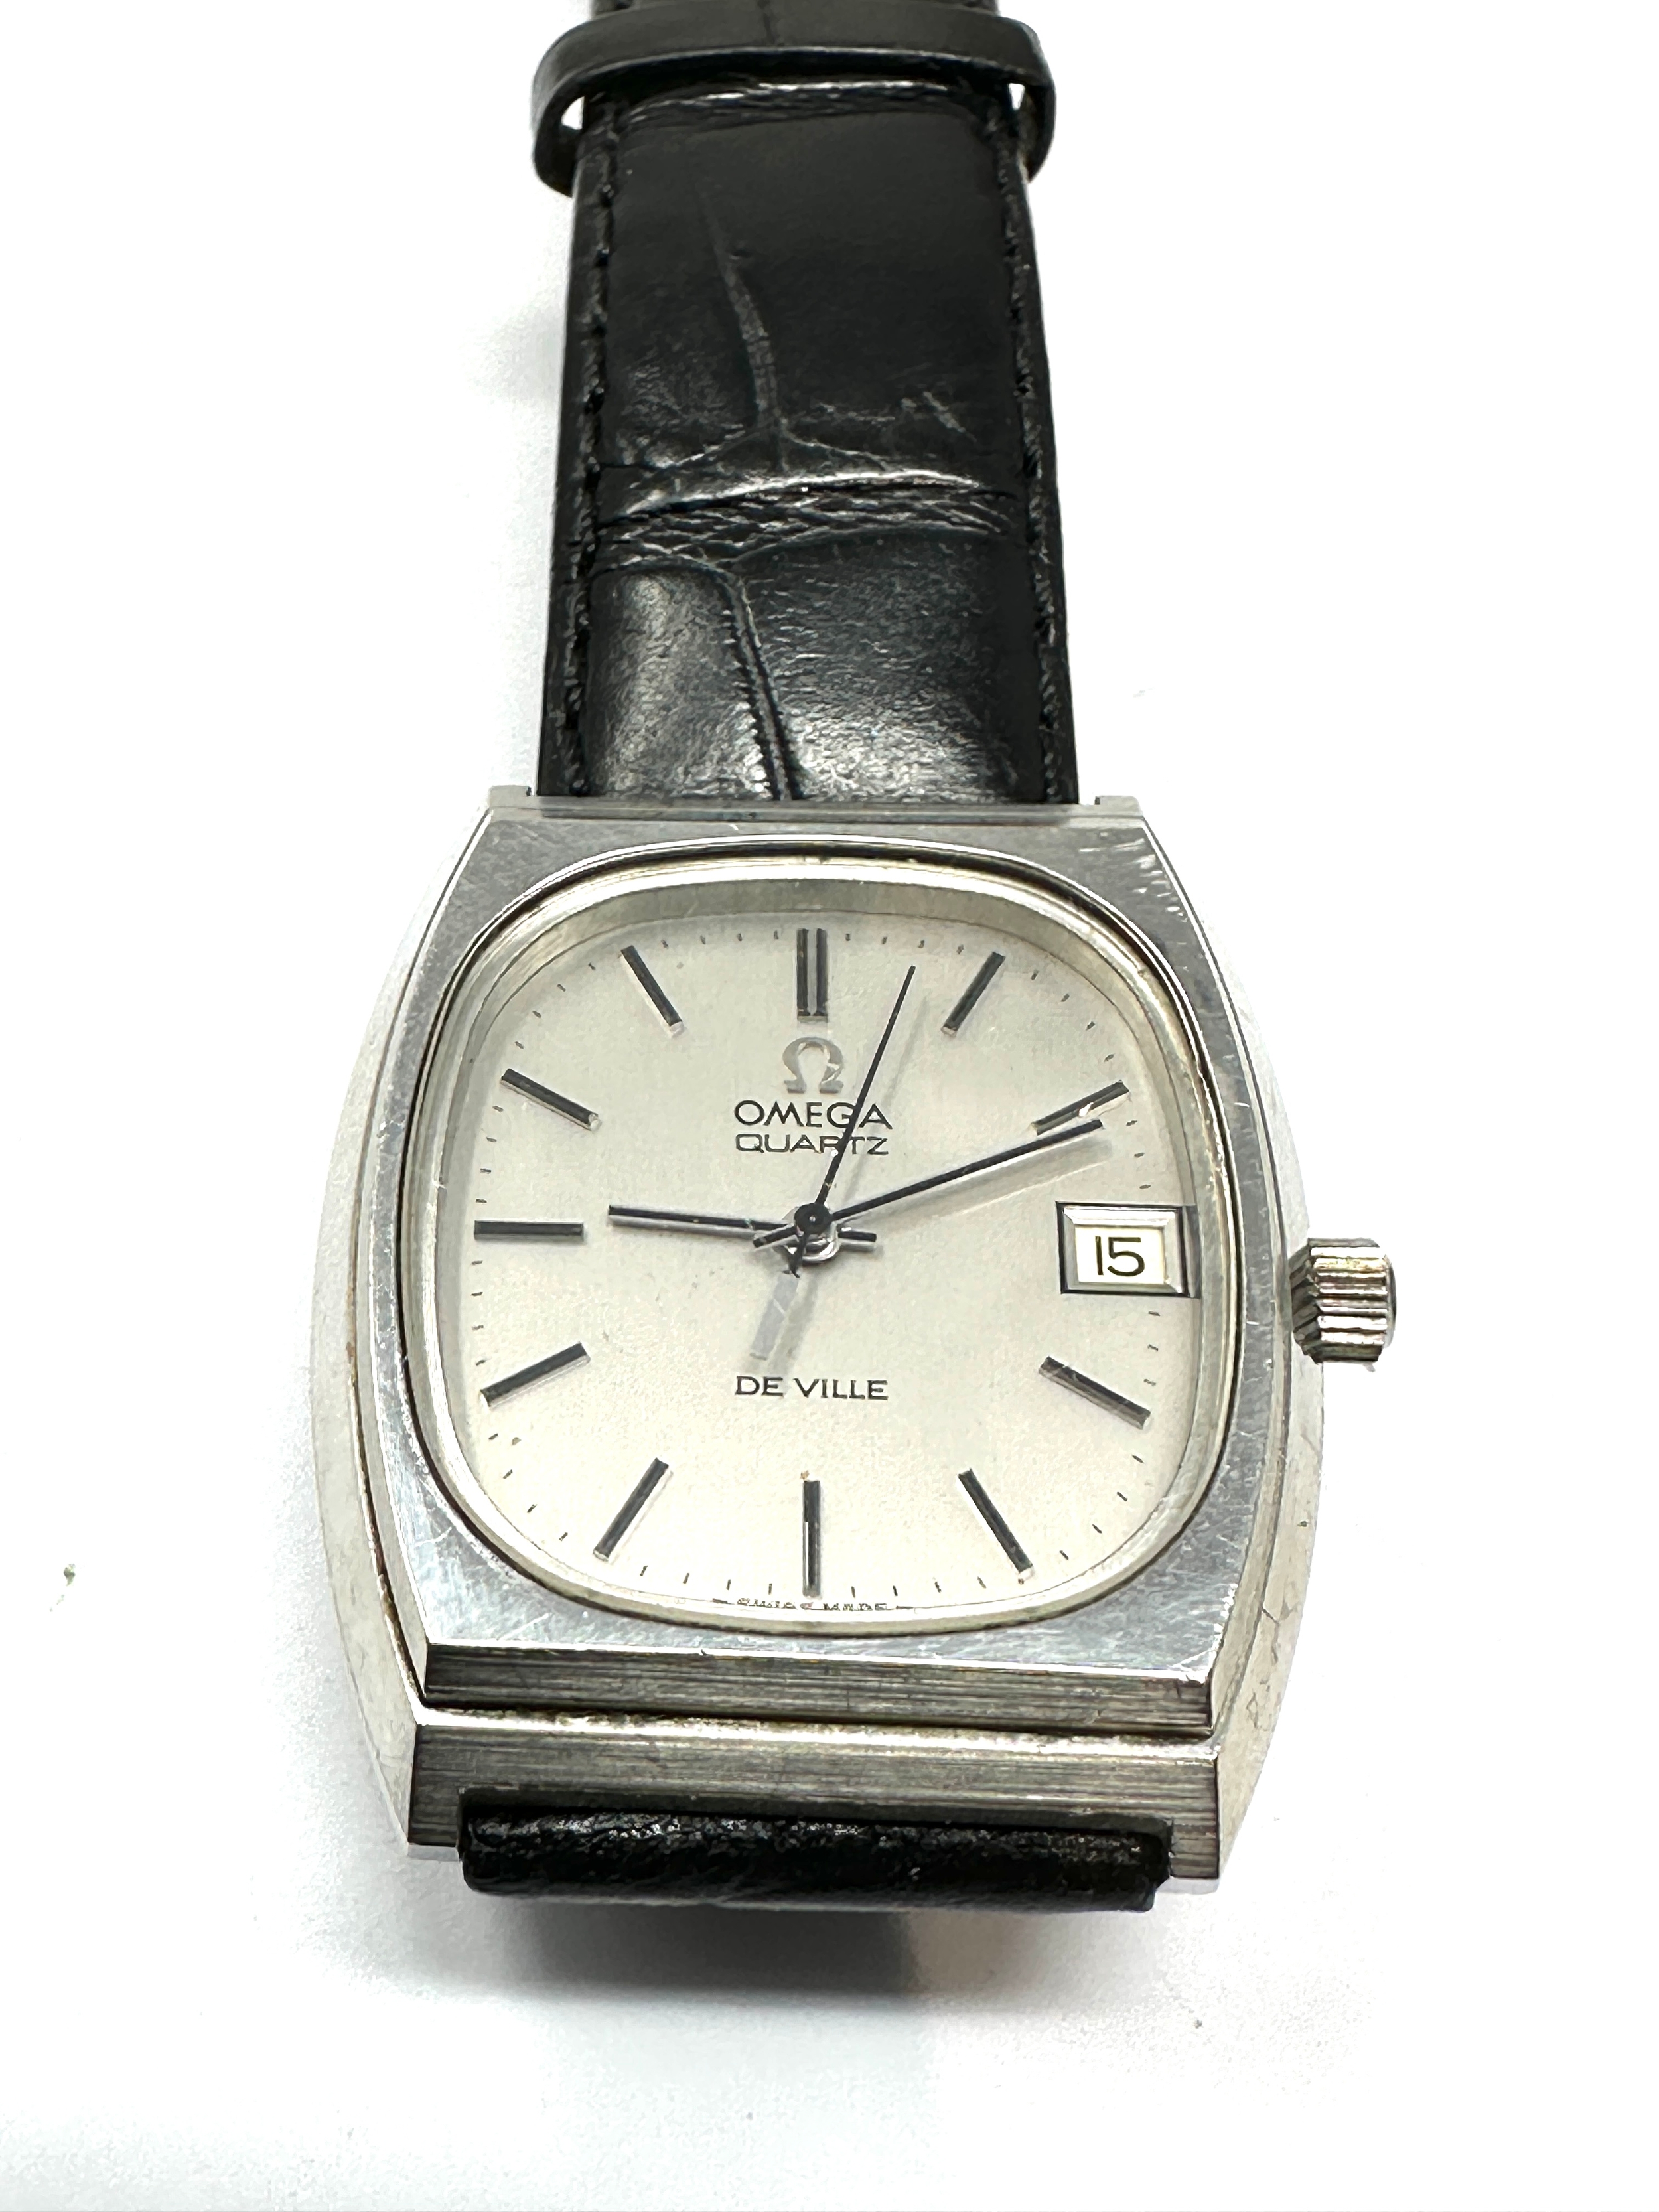 Vintage Gents Omega quartz Deville wrist watch the watch is not ticking possibly needs replacement